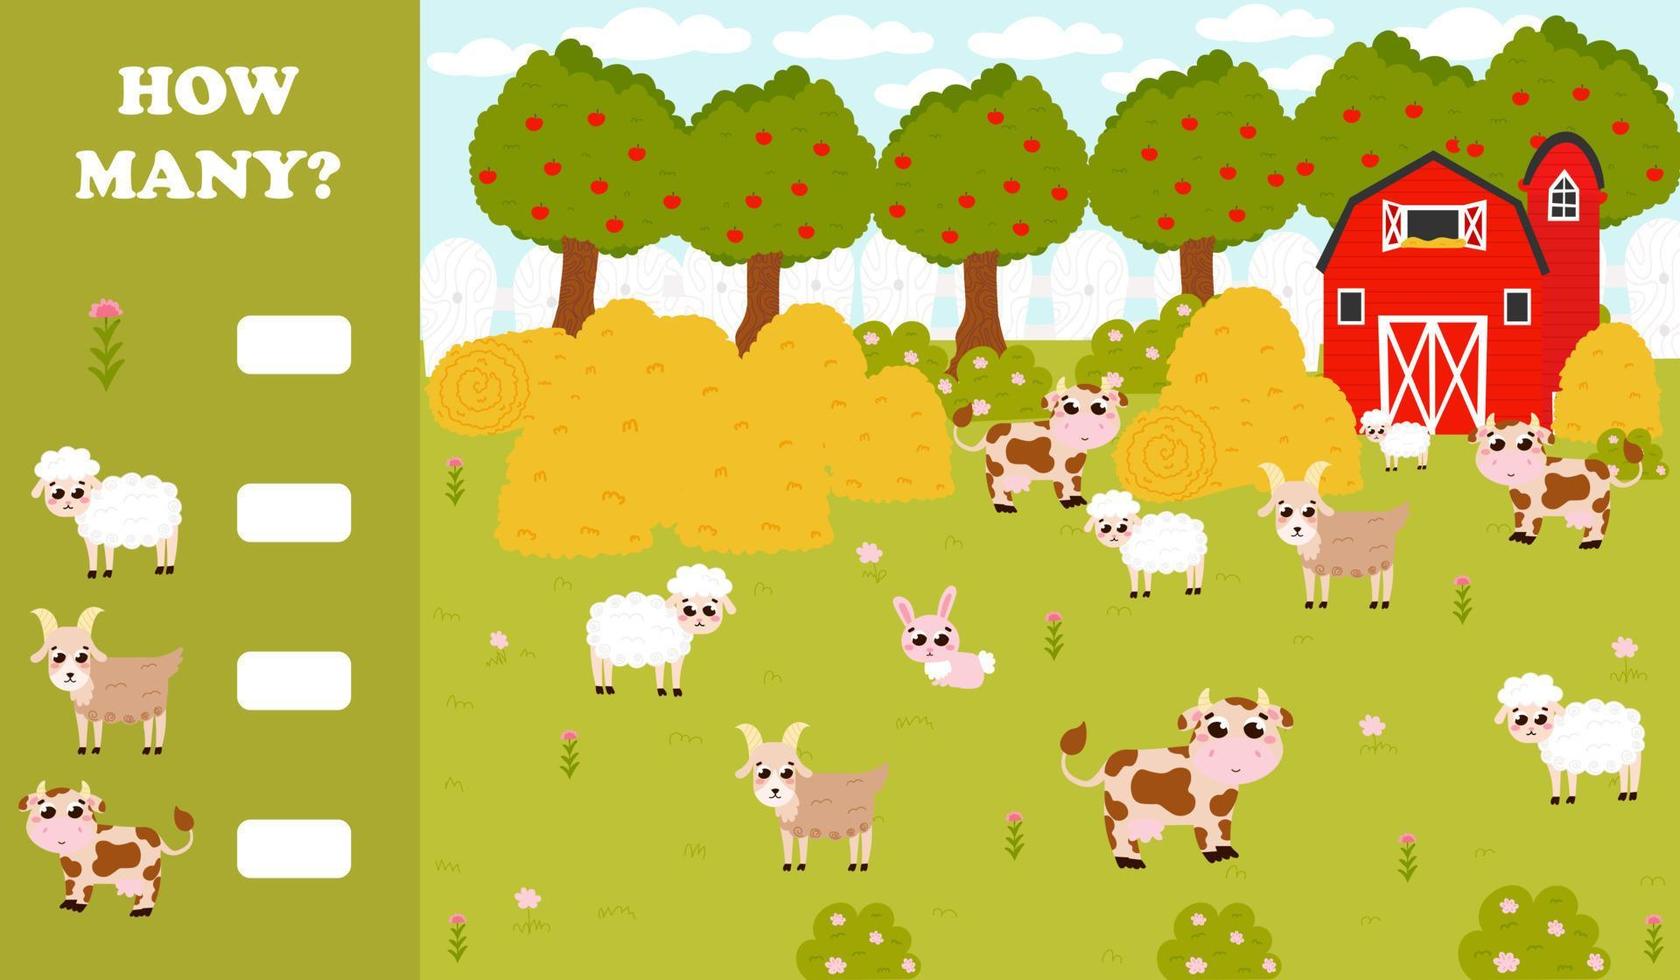 Counting game for kids with farm animals - sheeps and cows, goats and flowers, barn and haystacks in cartoon style vector